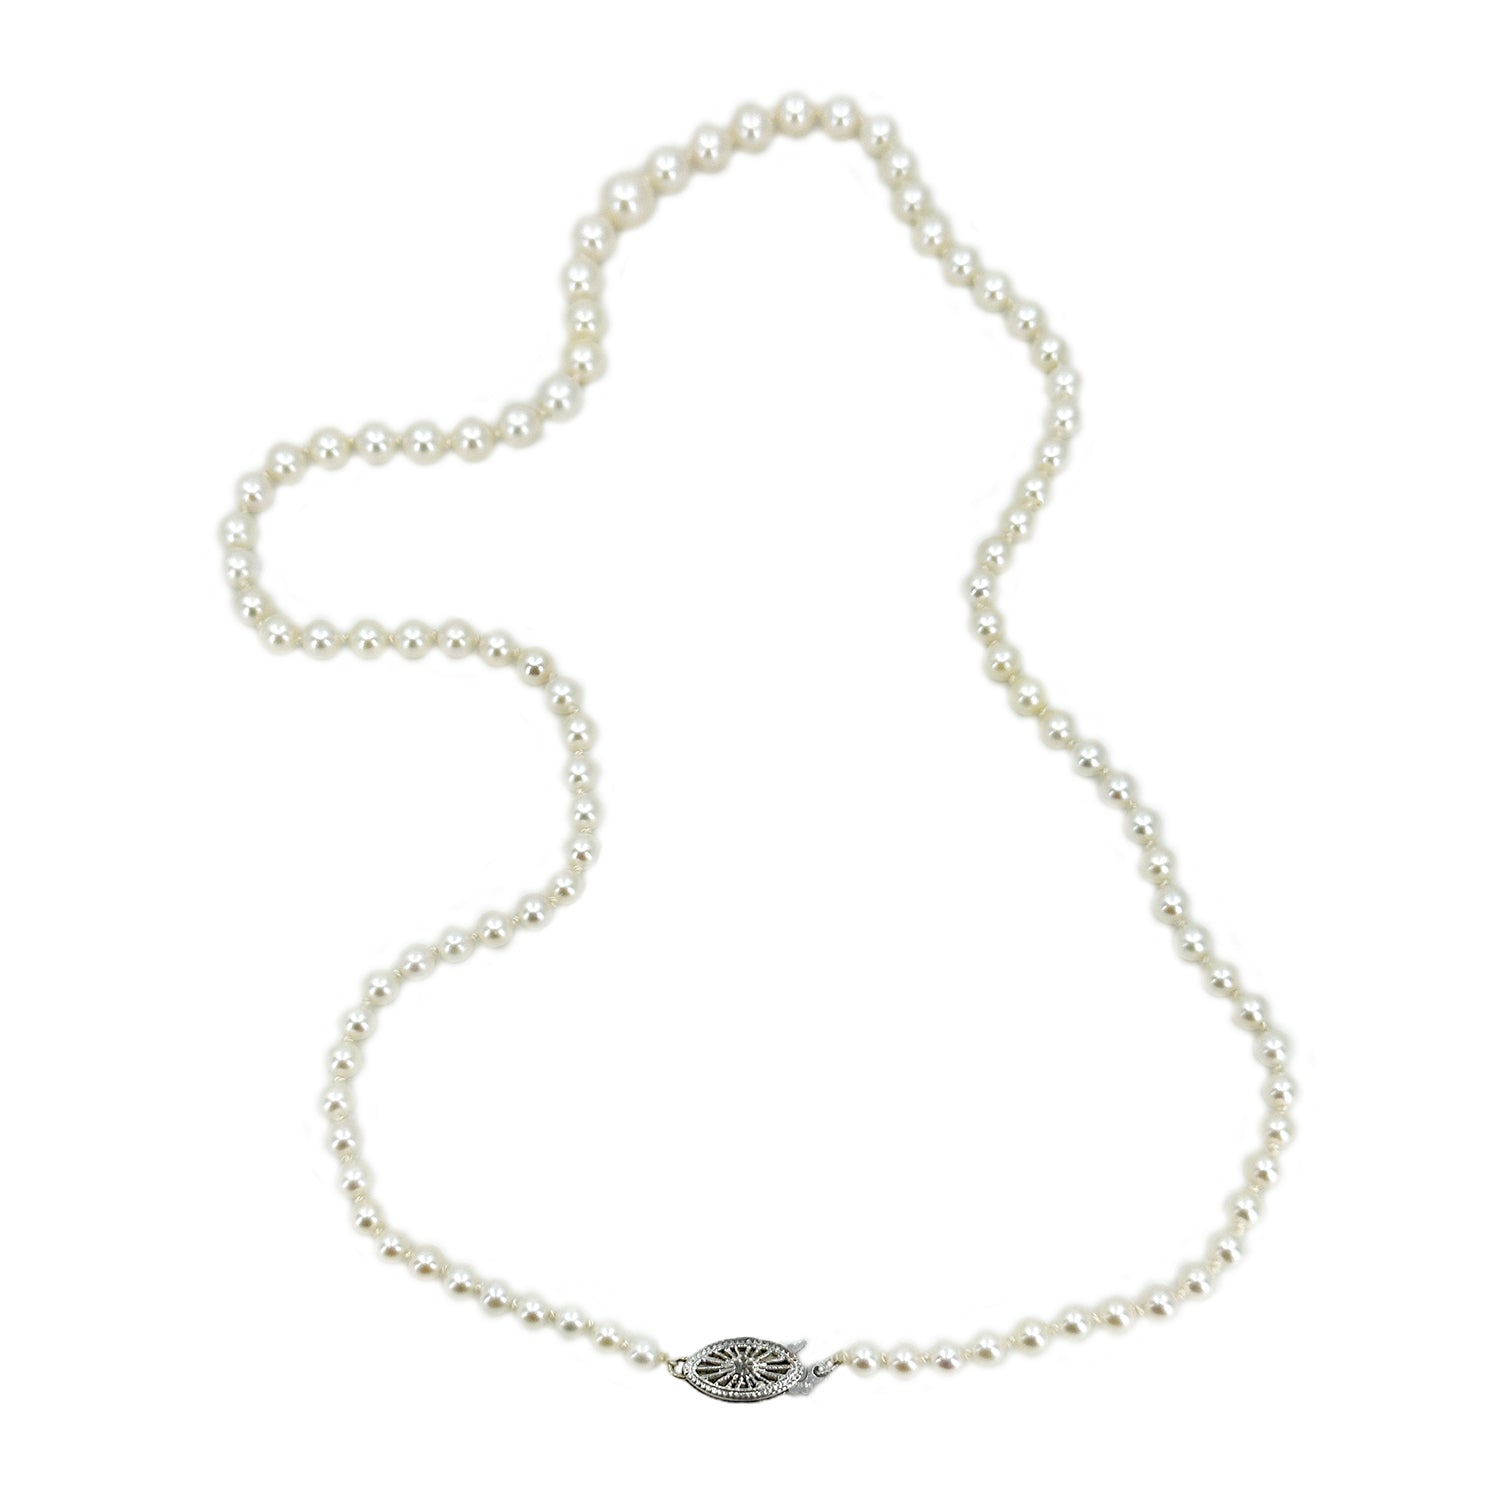 Retro Filigree Japanese Saltwater Cultured Akoya Pearl Necklace - 10K White Gold 20.75 Inch